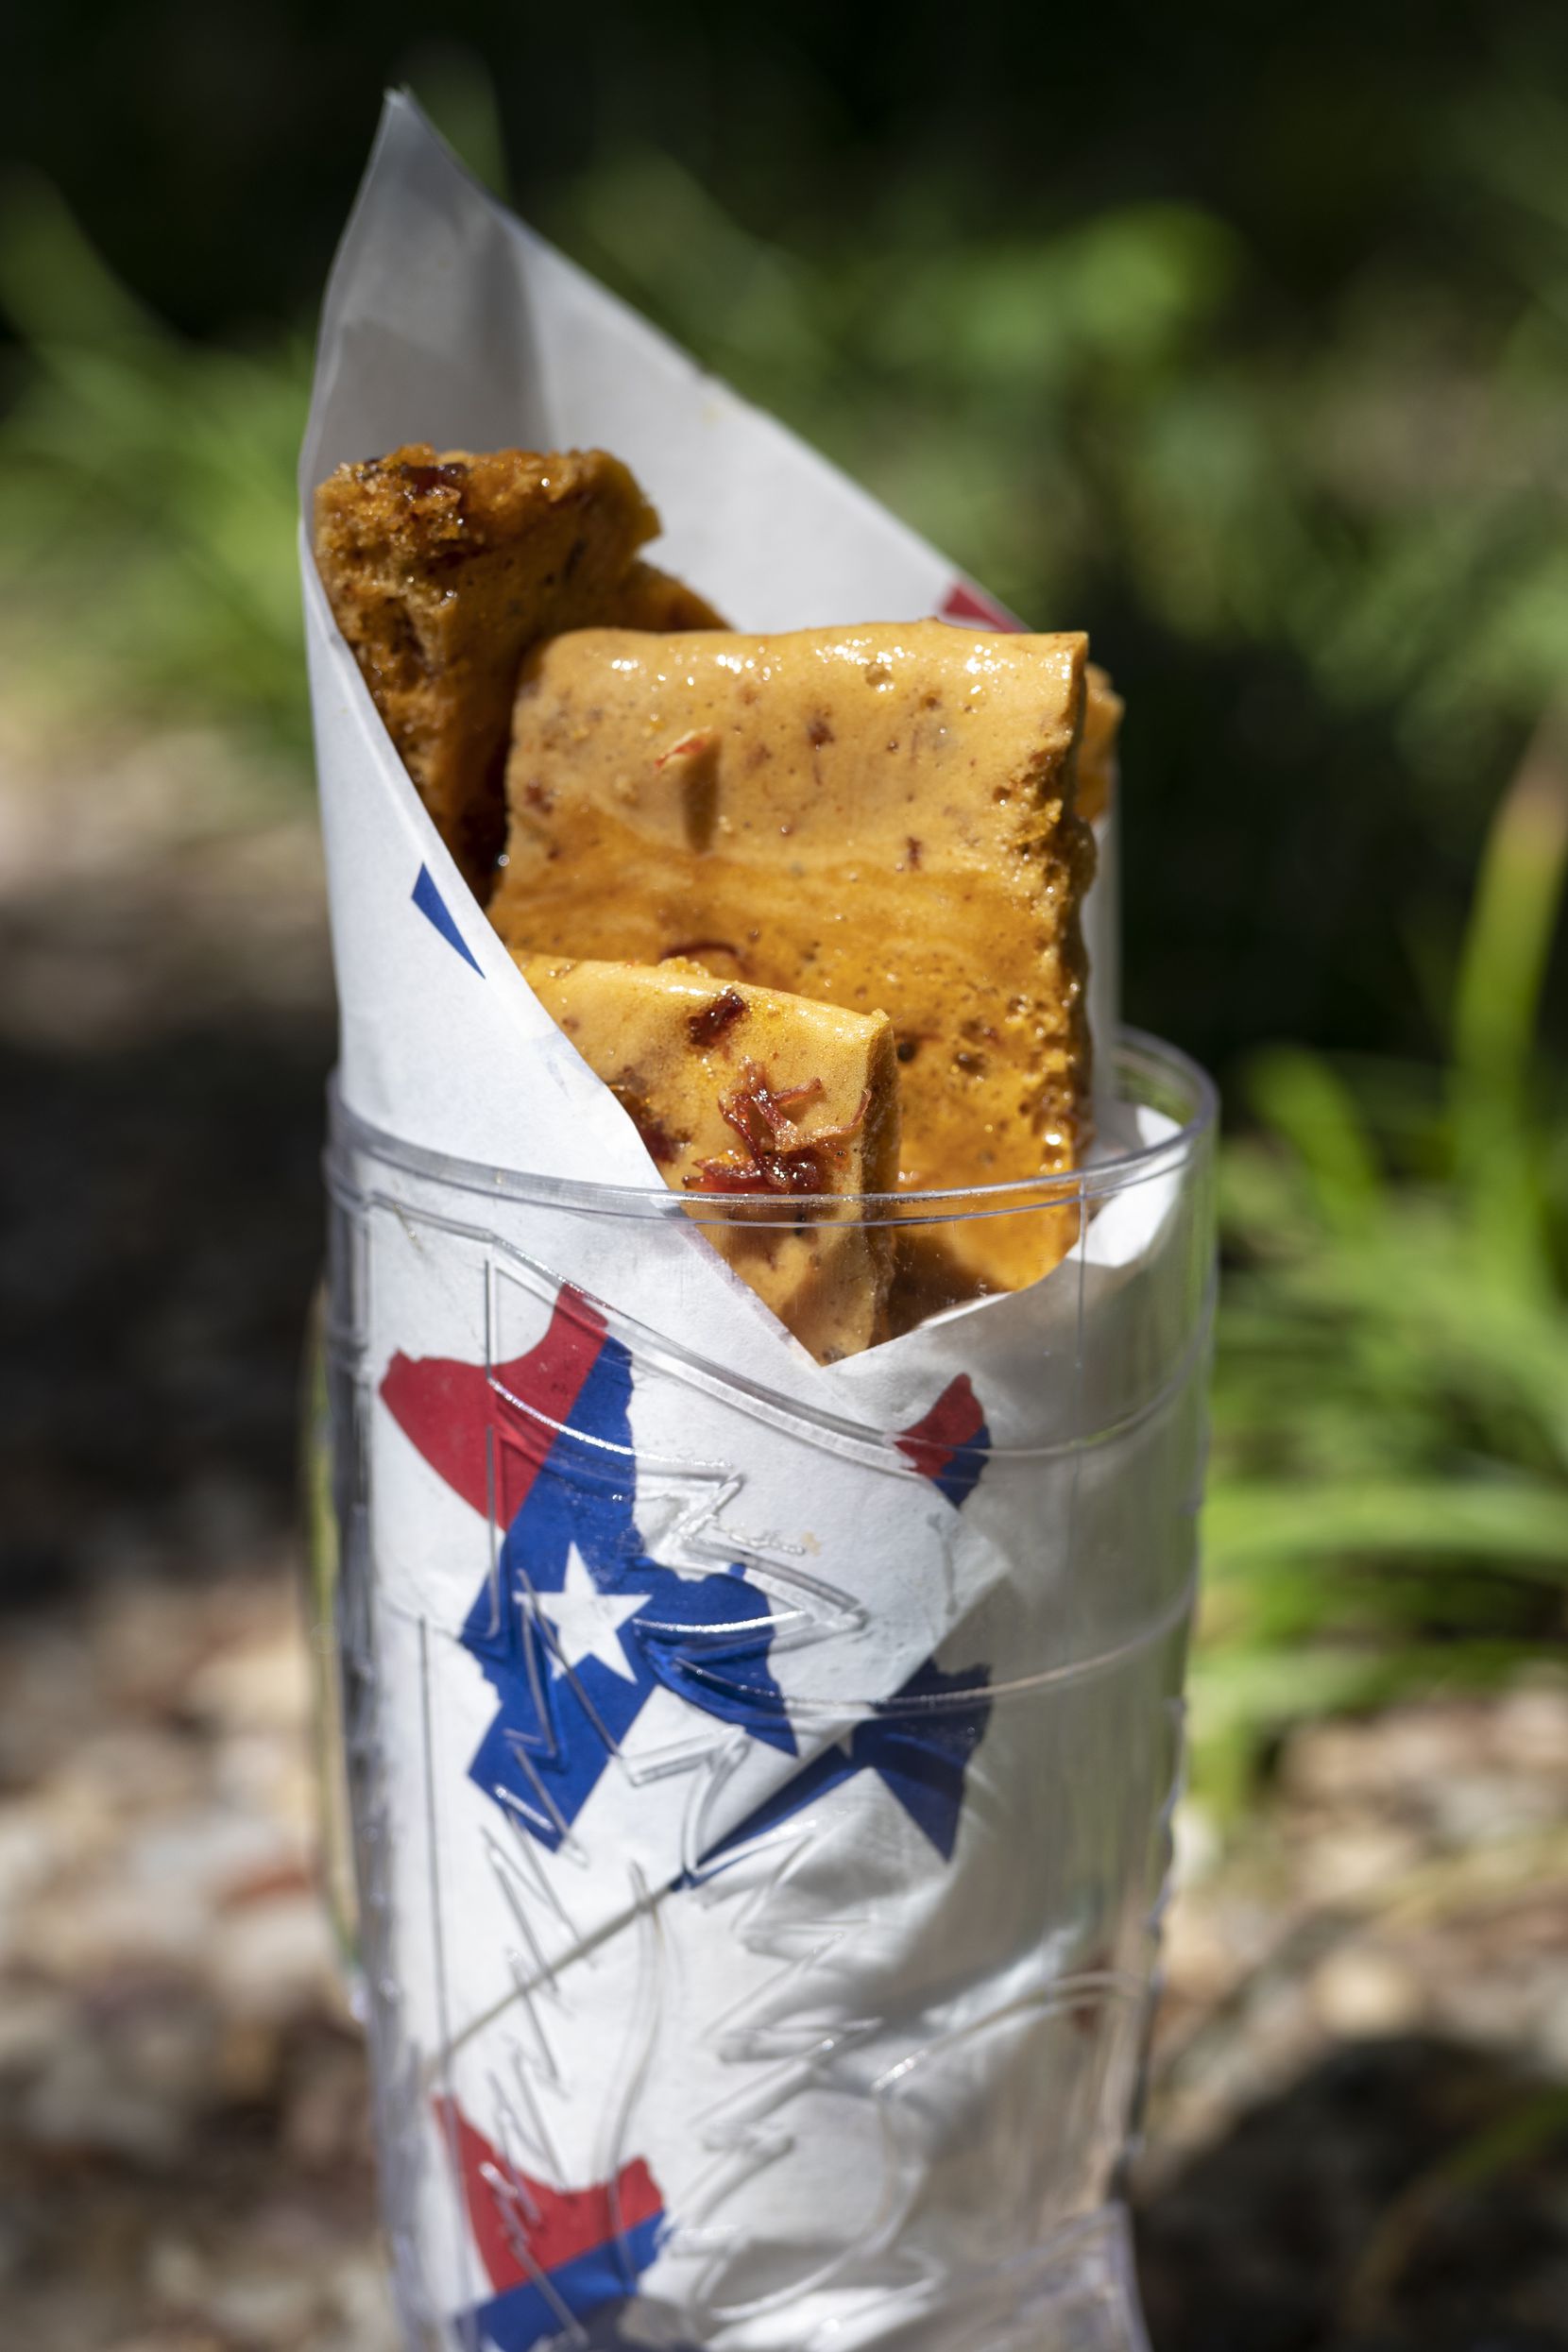 Here's one good thing about the Brisket Brittle: You get to take home that cute plastic boot...